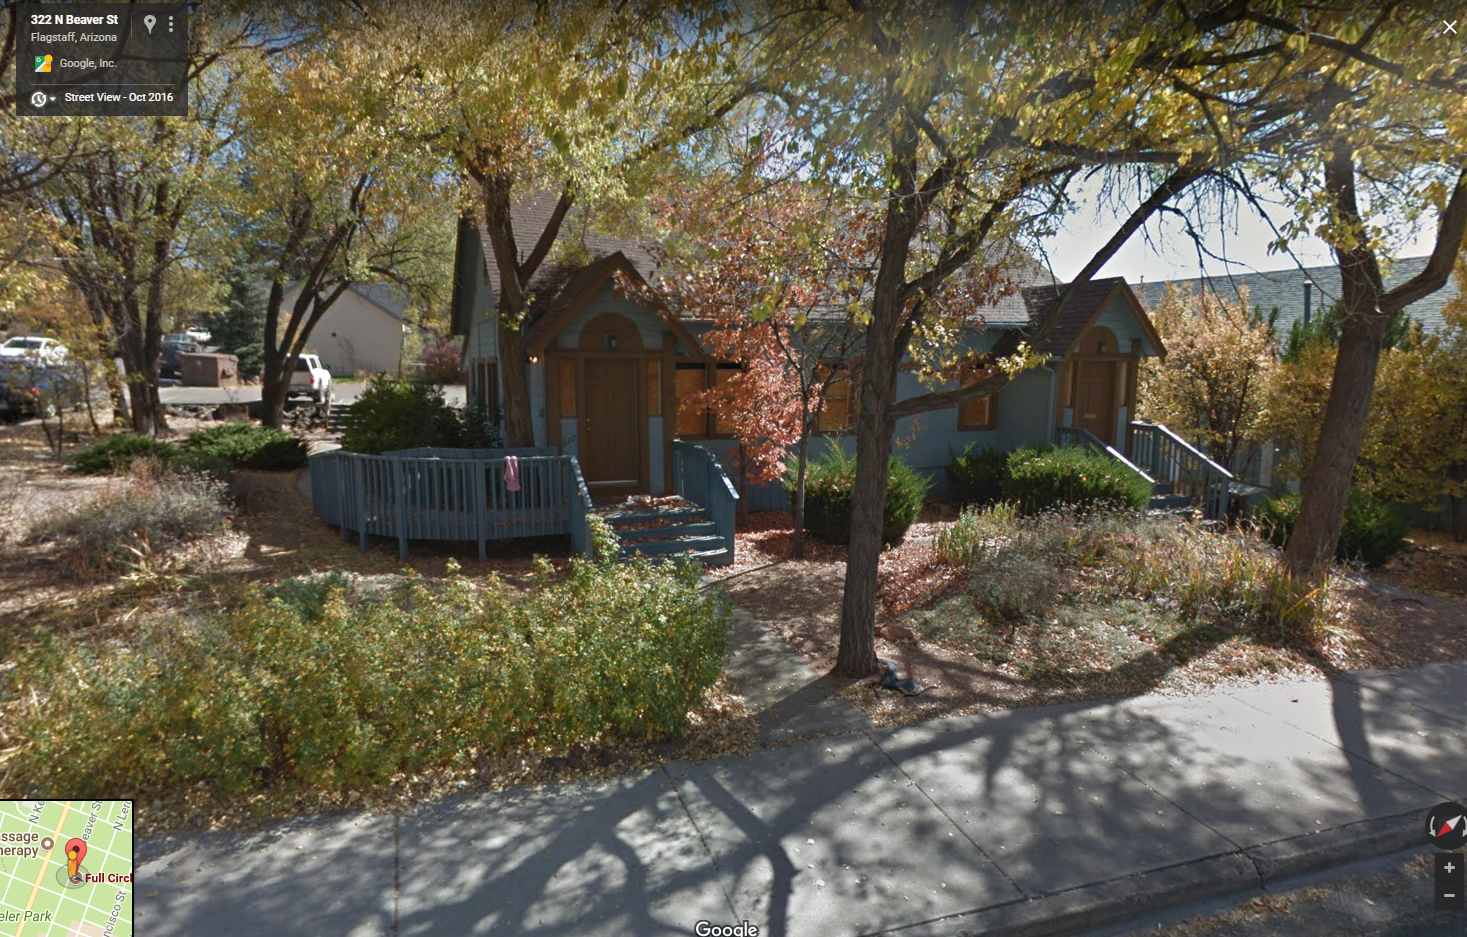 Duplex on the site previously, Google Street View 2018